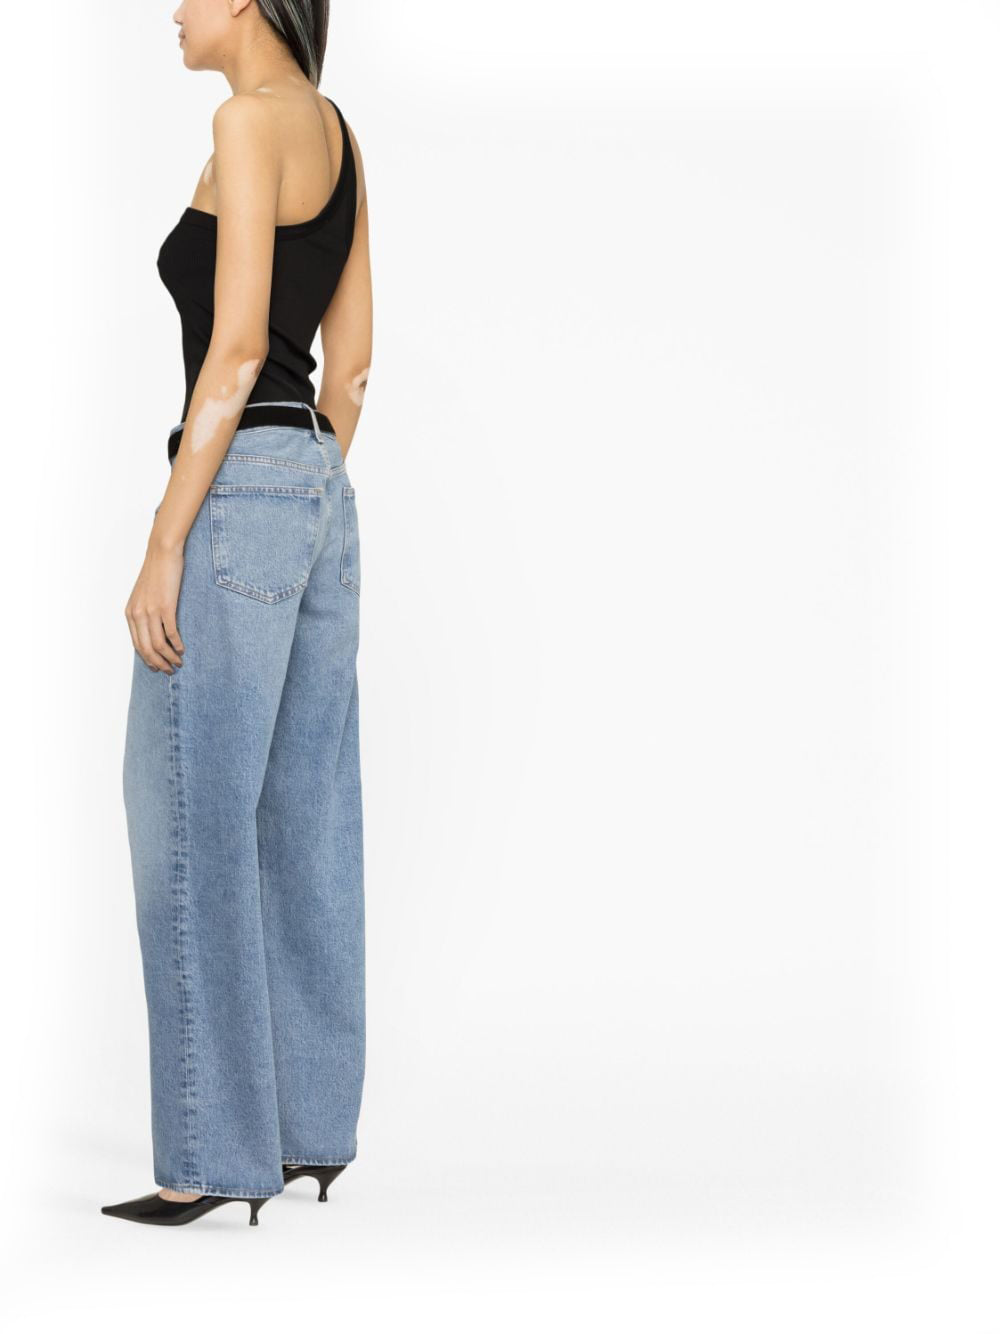 Renounce Jeans Trousers